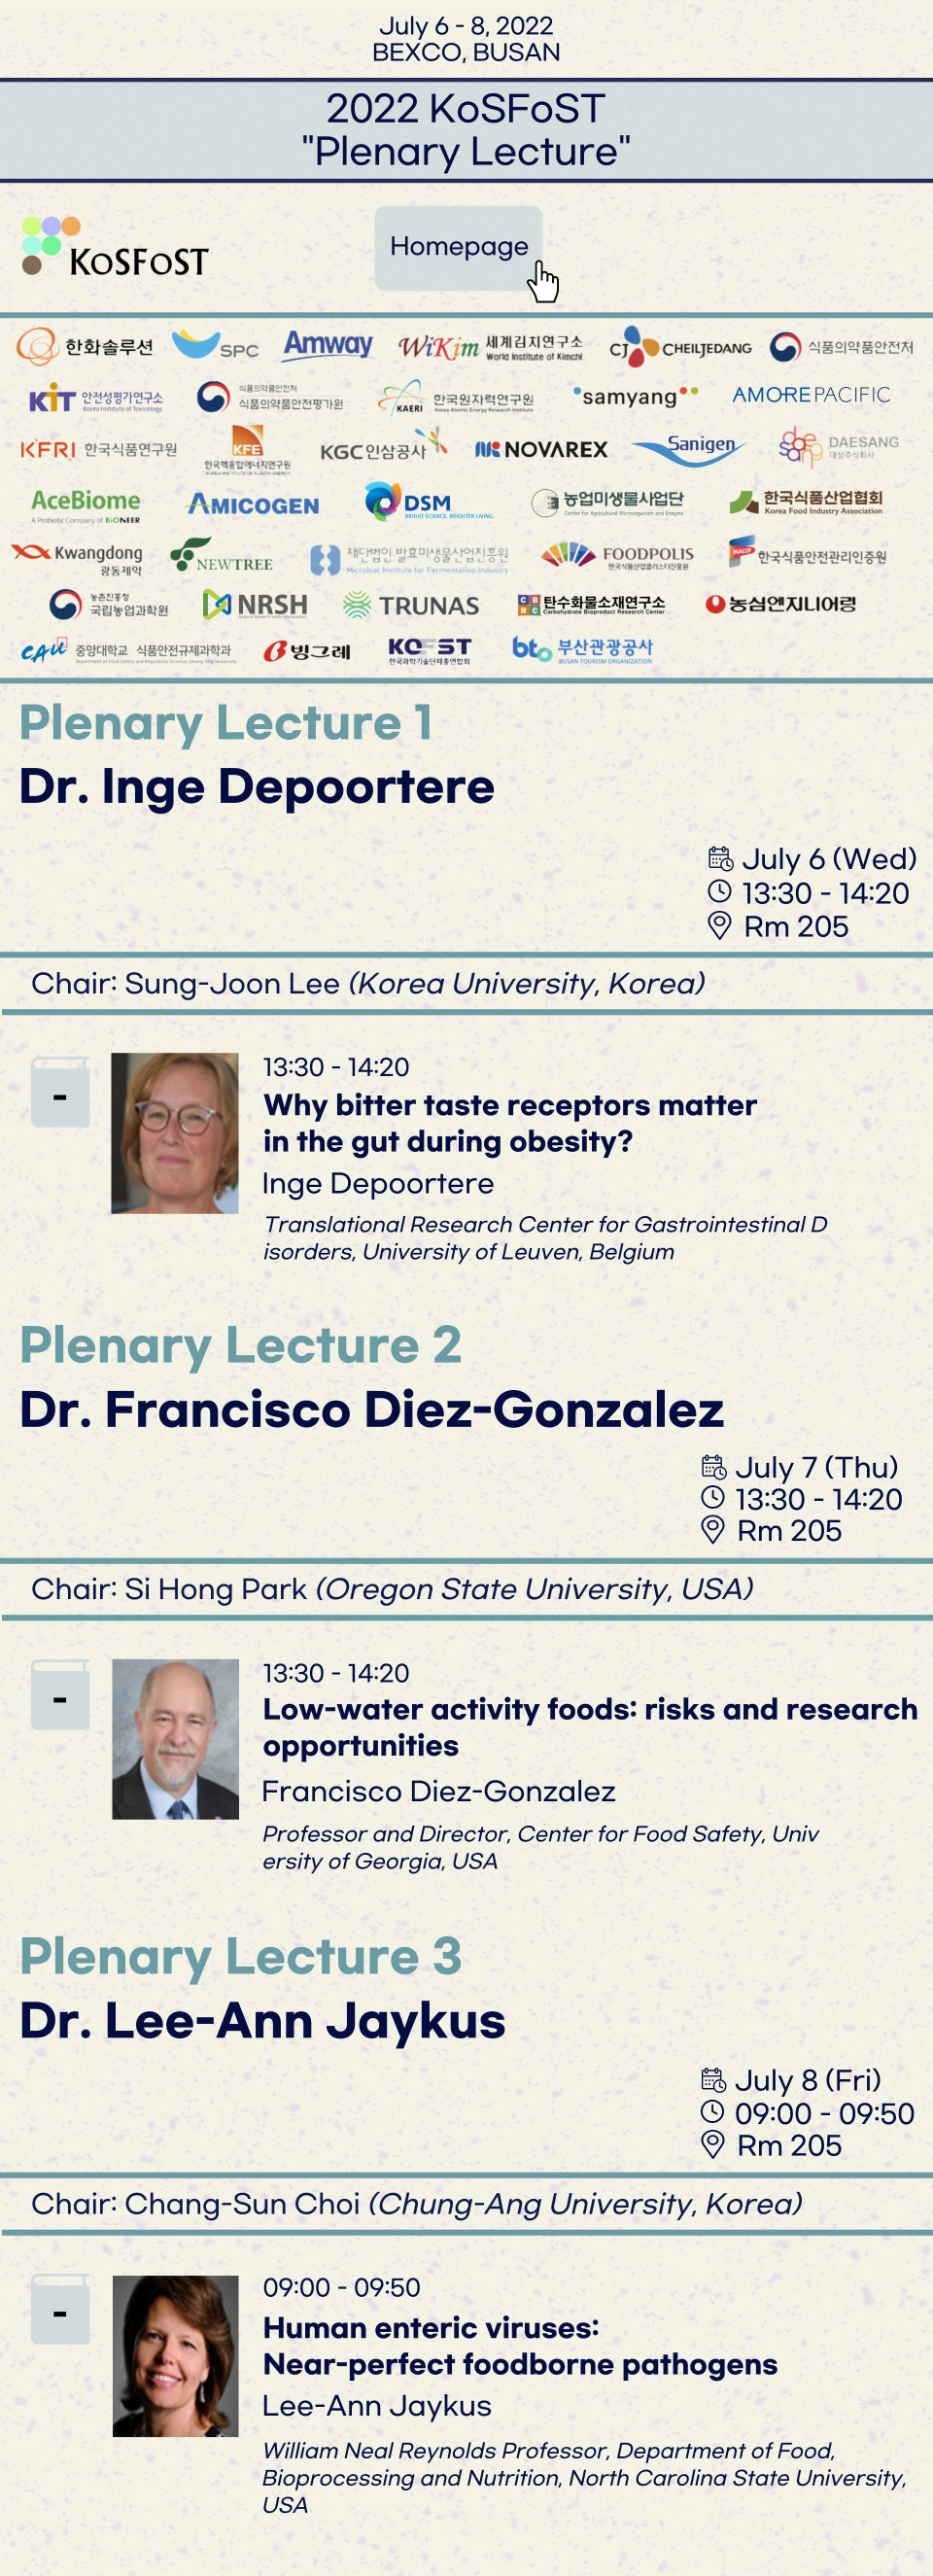 Plenary Lectures